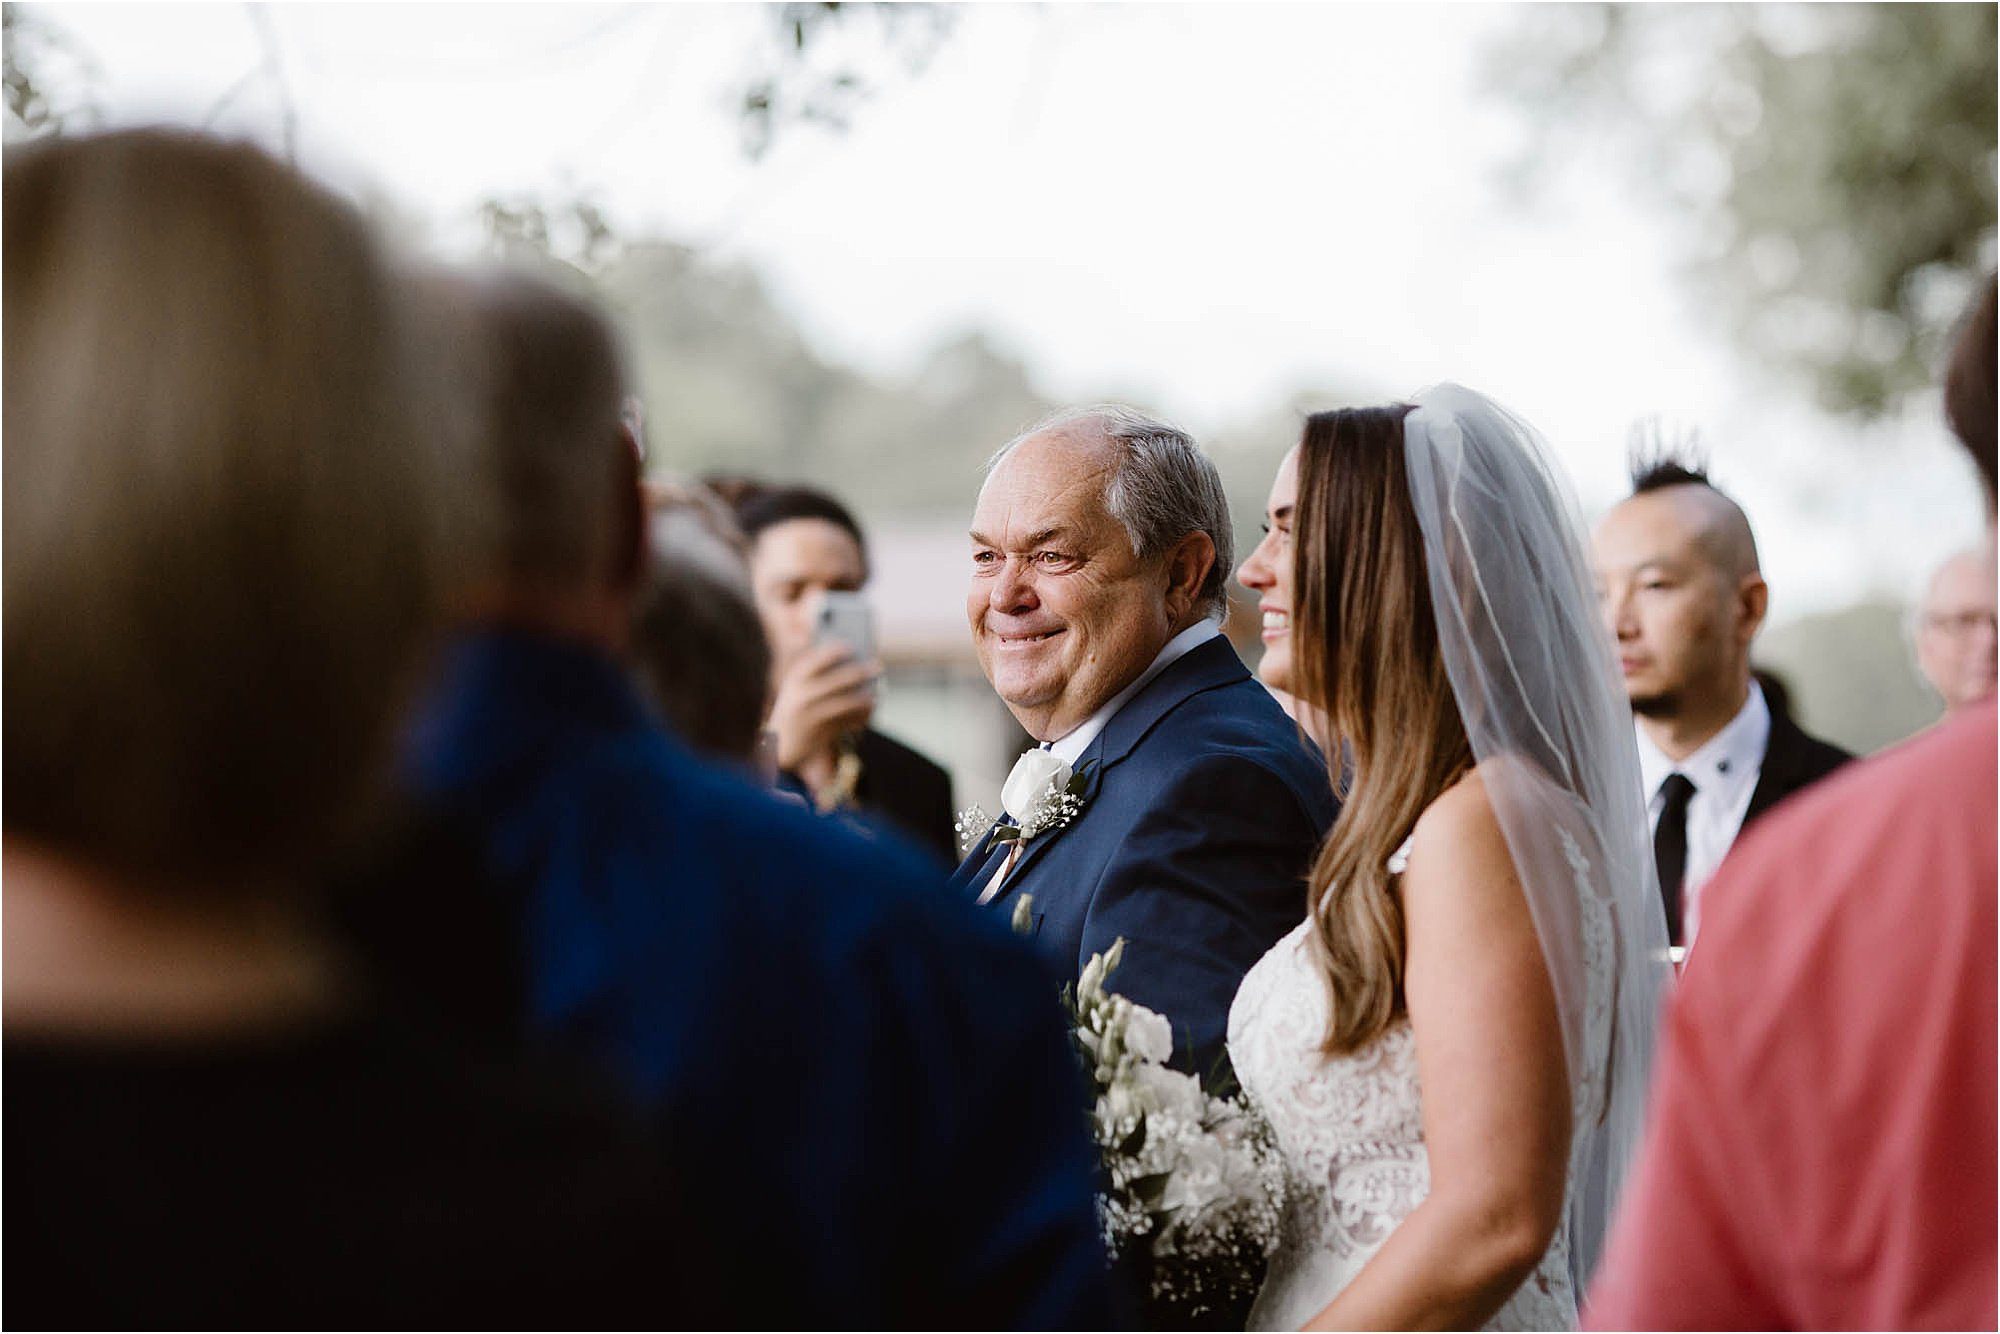 dad walking daughter down the aisle at backyard wedding ceremony